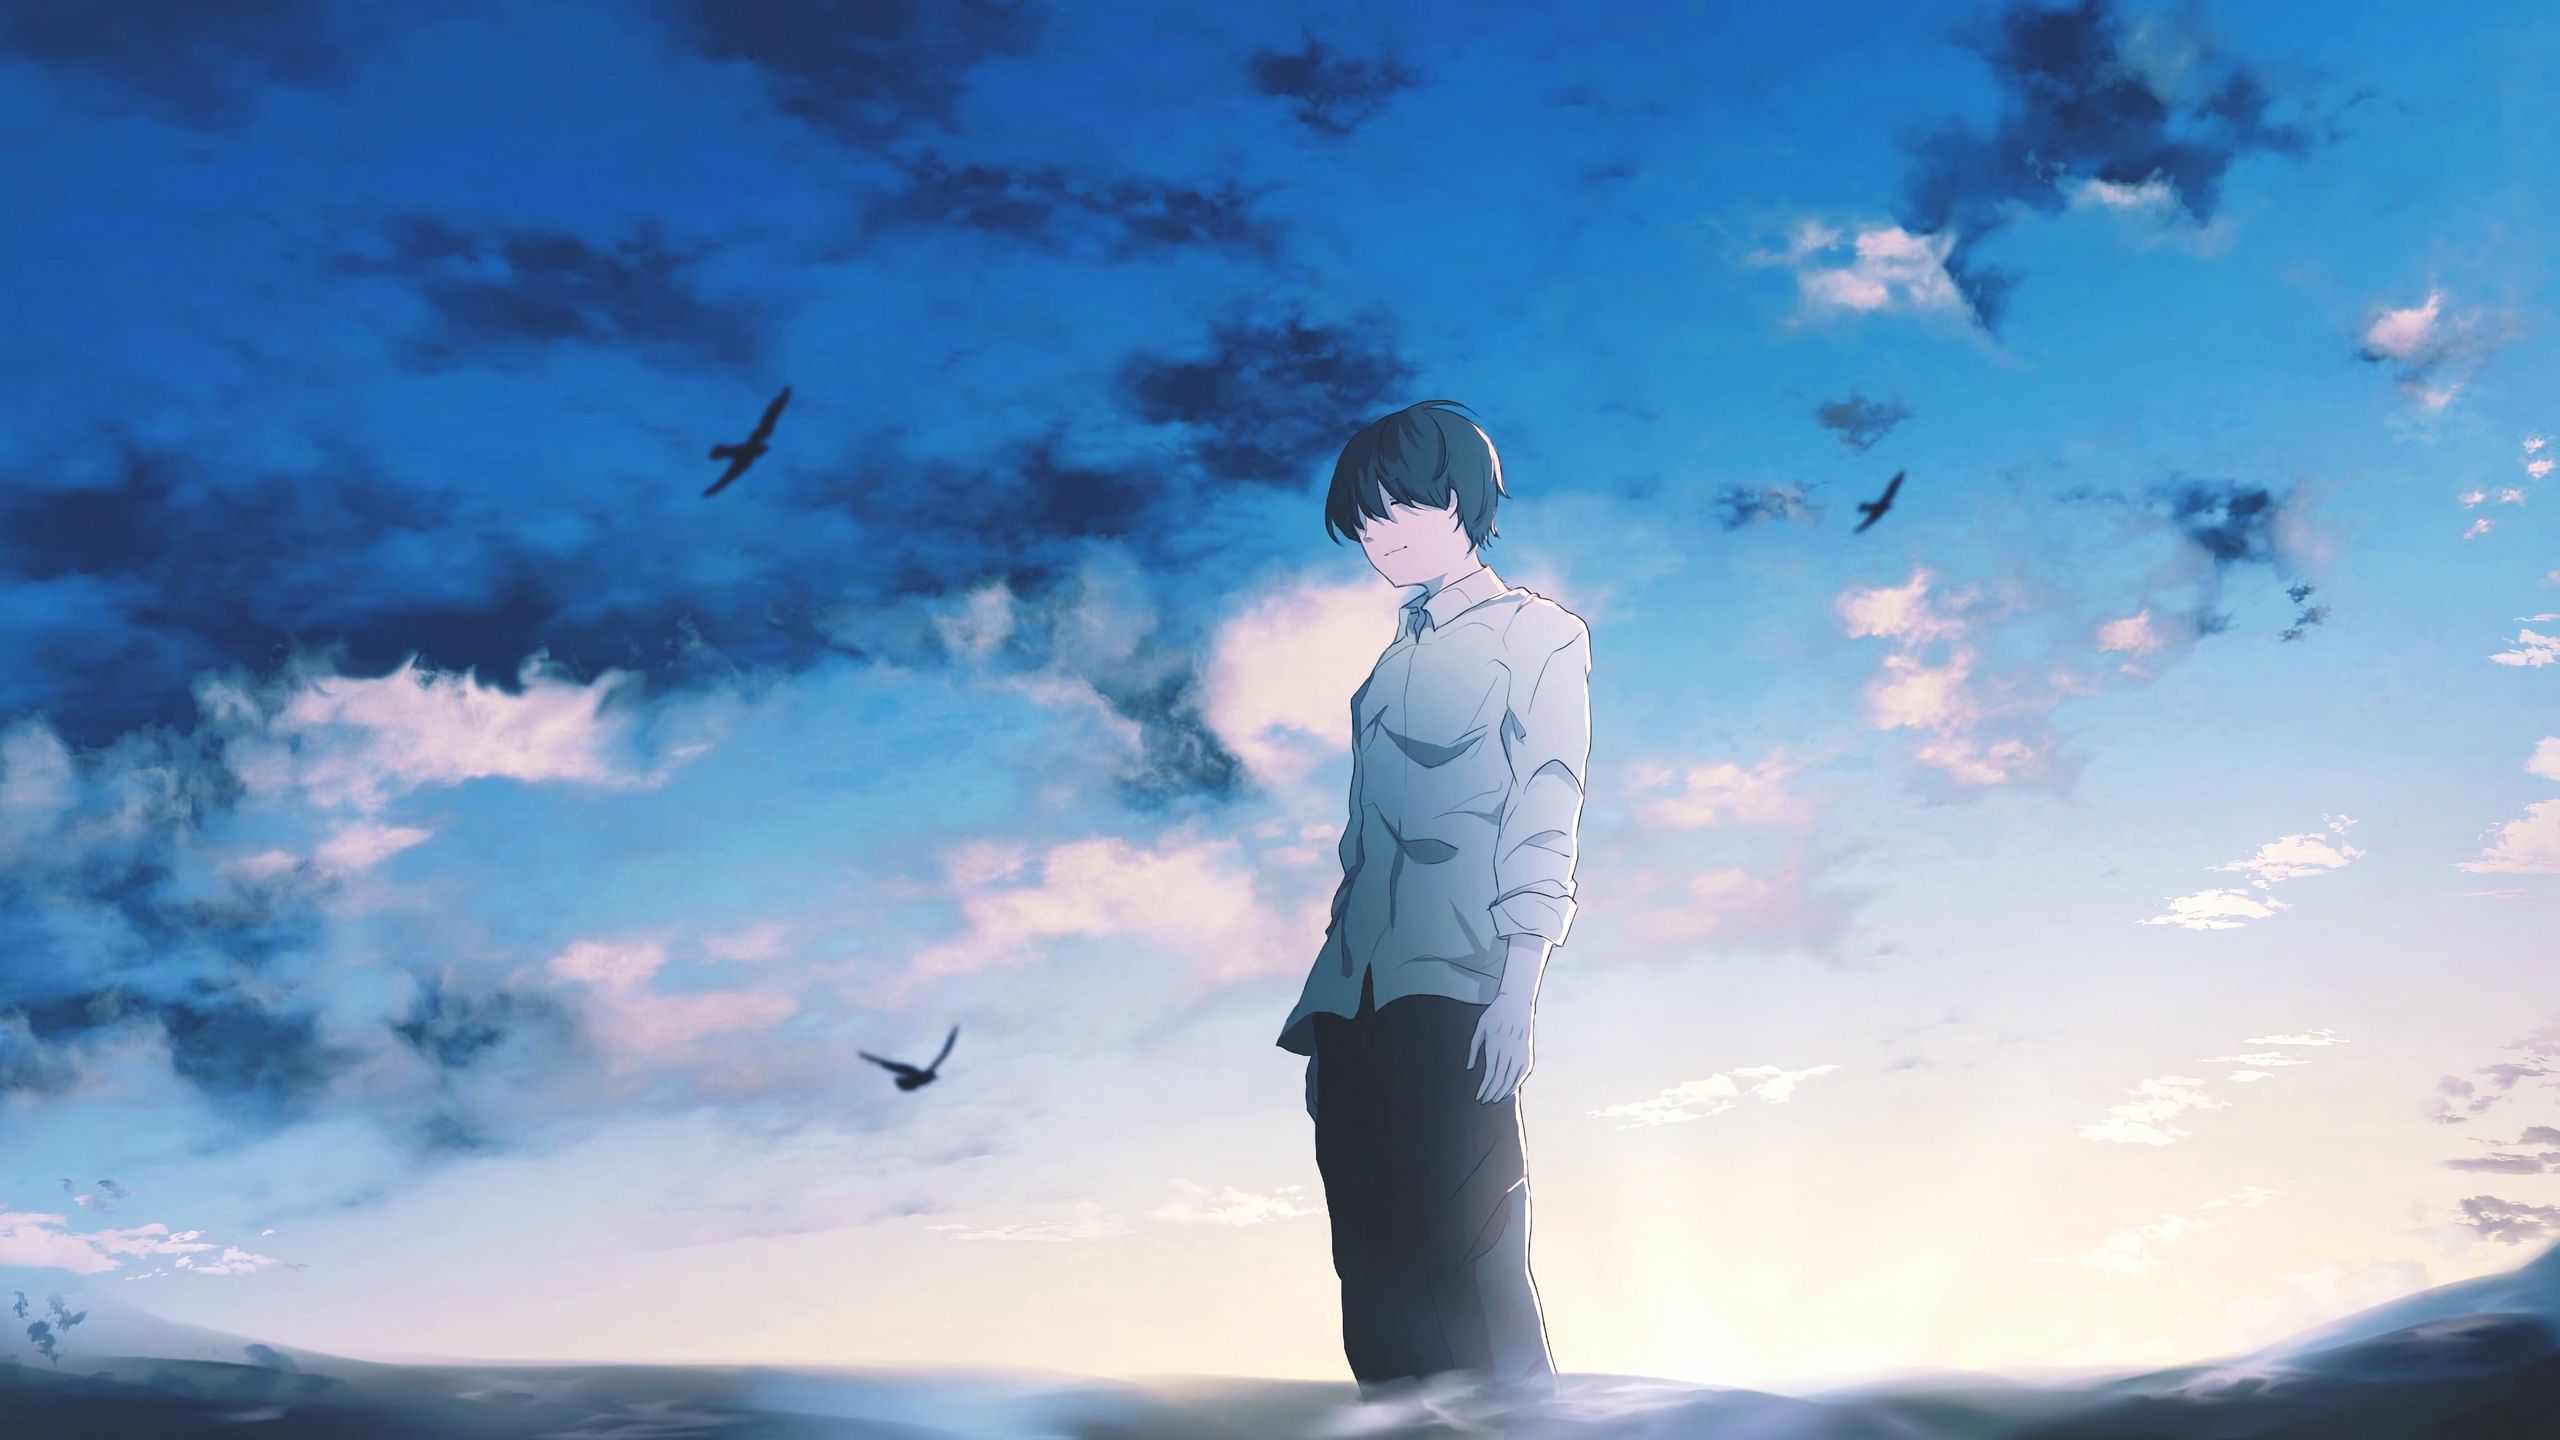 Download wallpaper 2560x1440 guy, alone, sad, water, anime widescreen 16:9  hd background